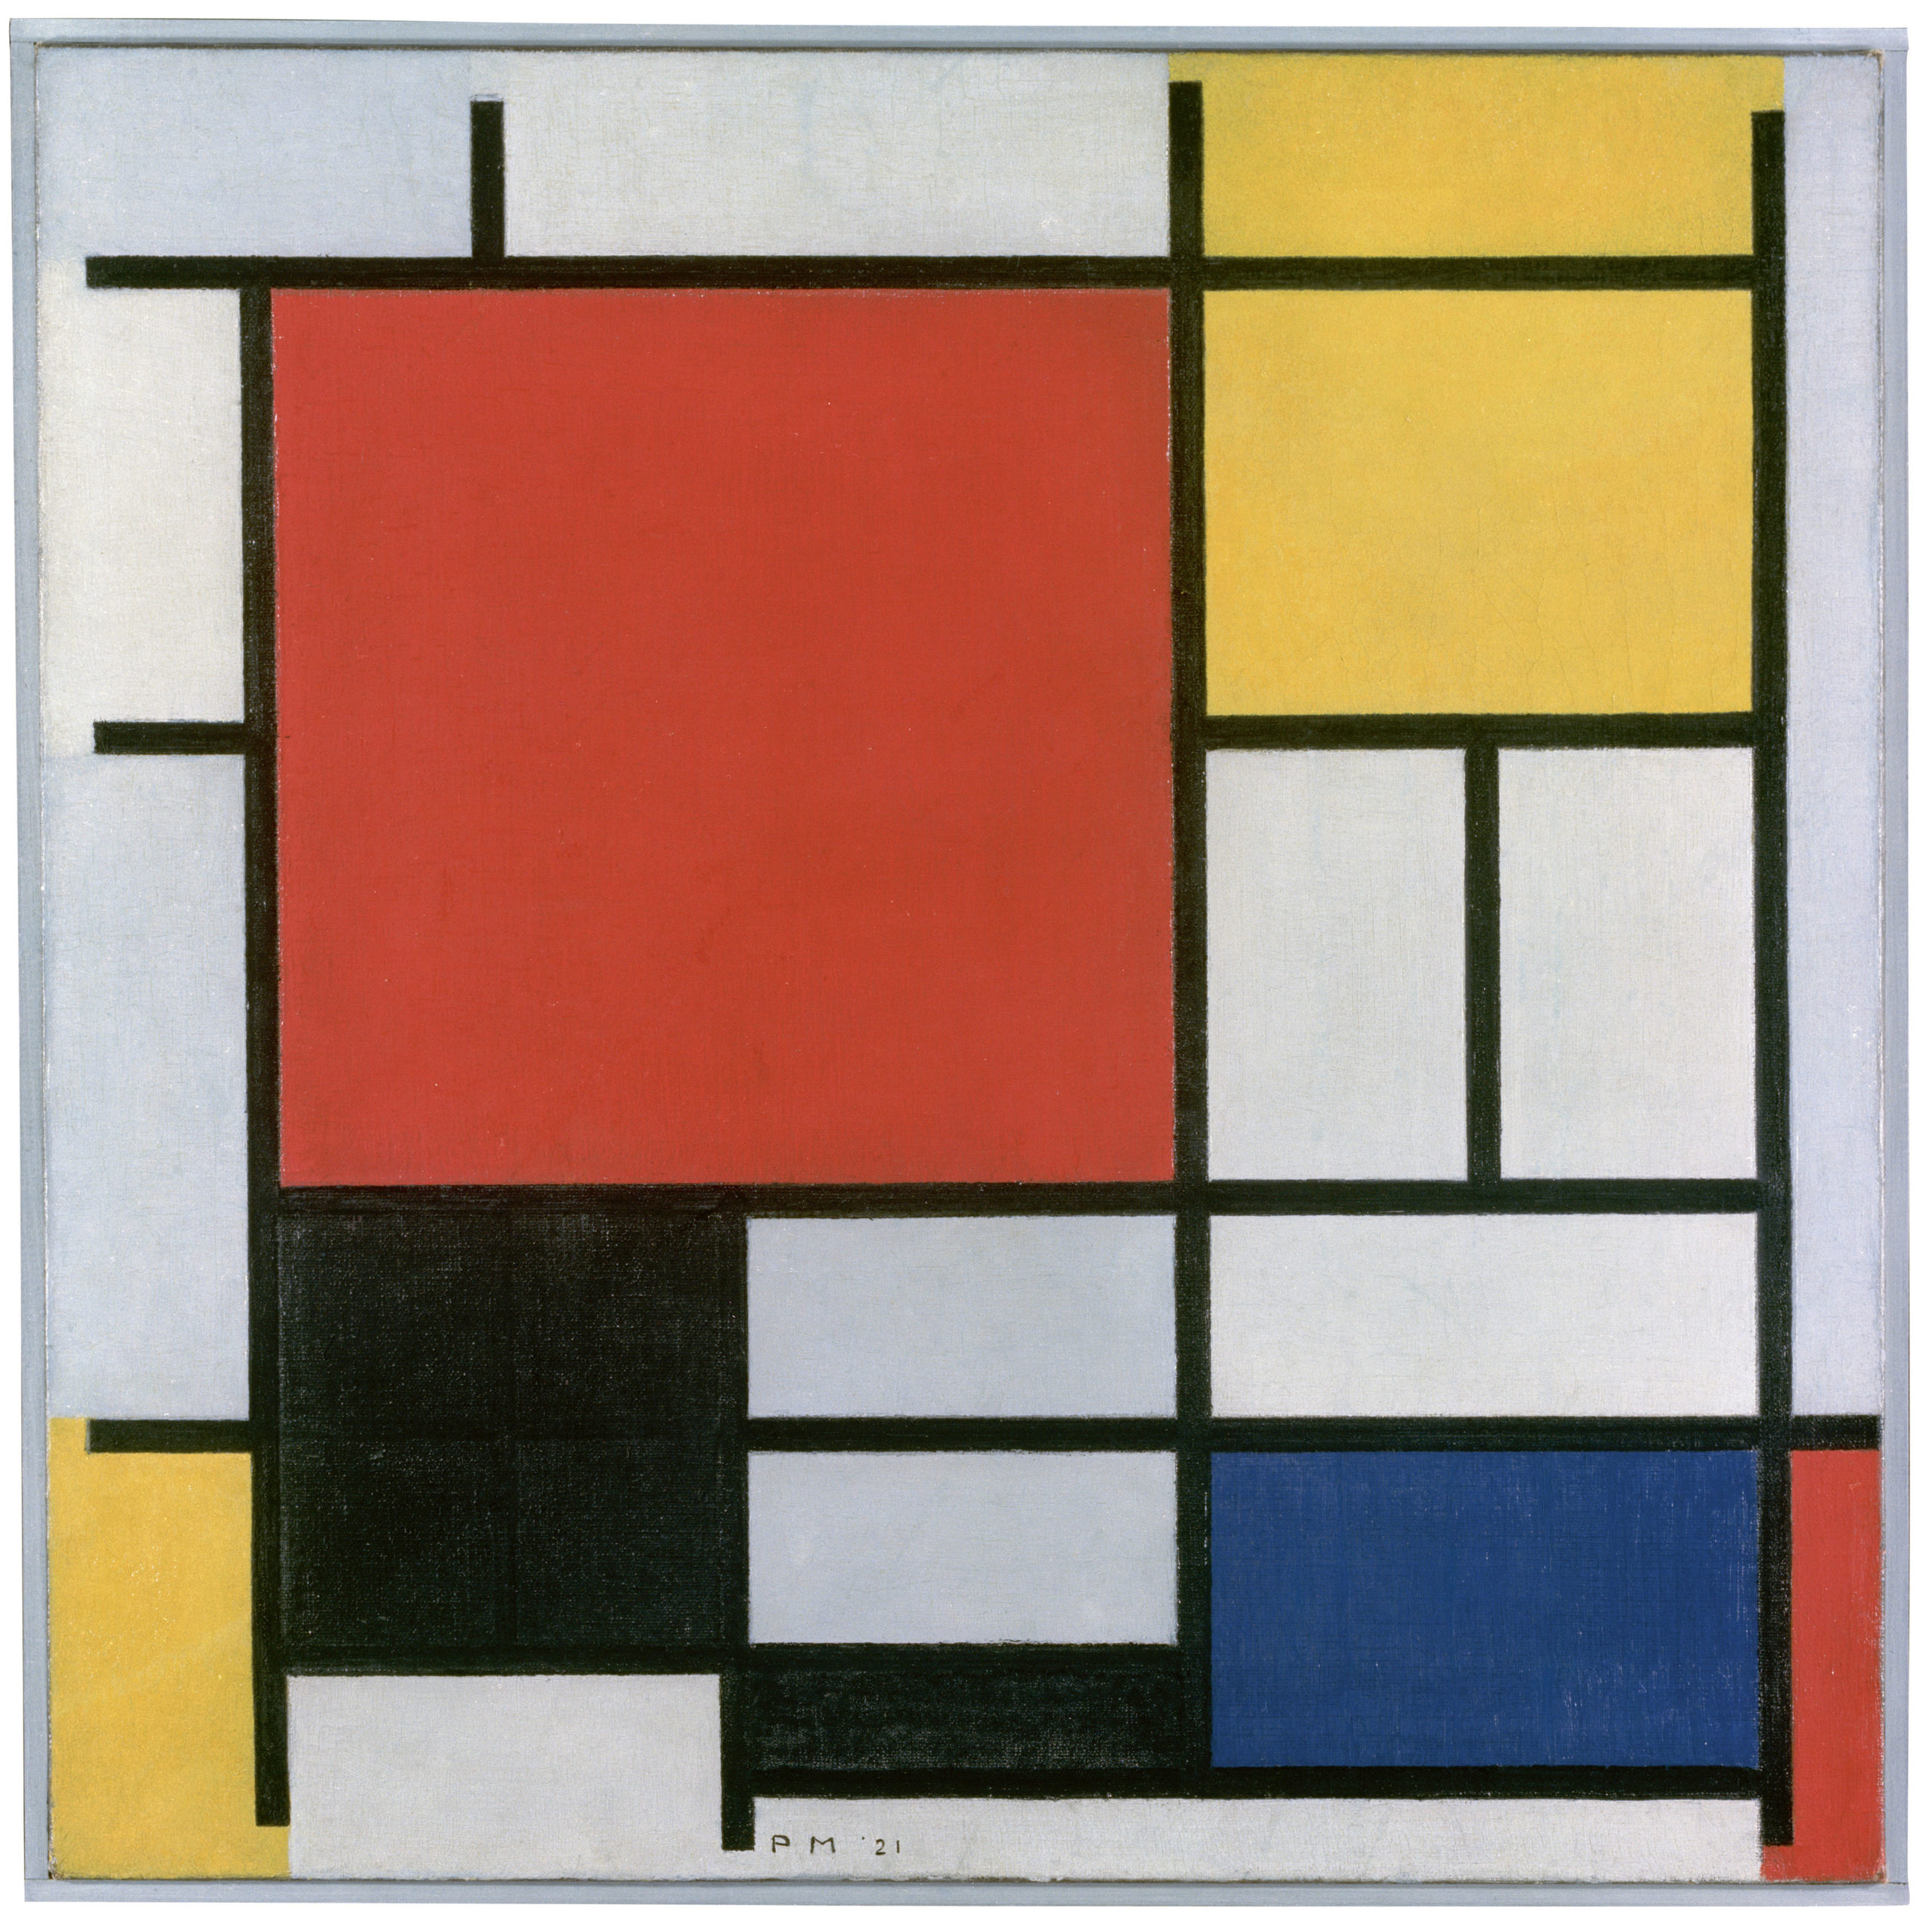 Mondrian in theory and practice